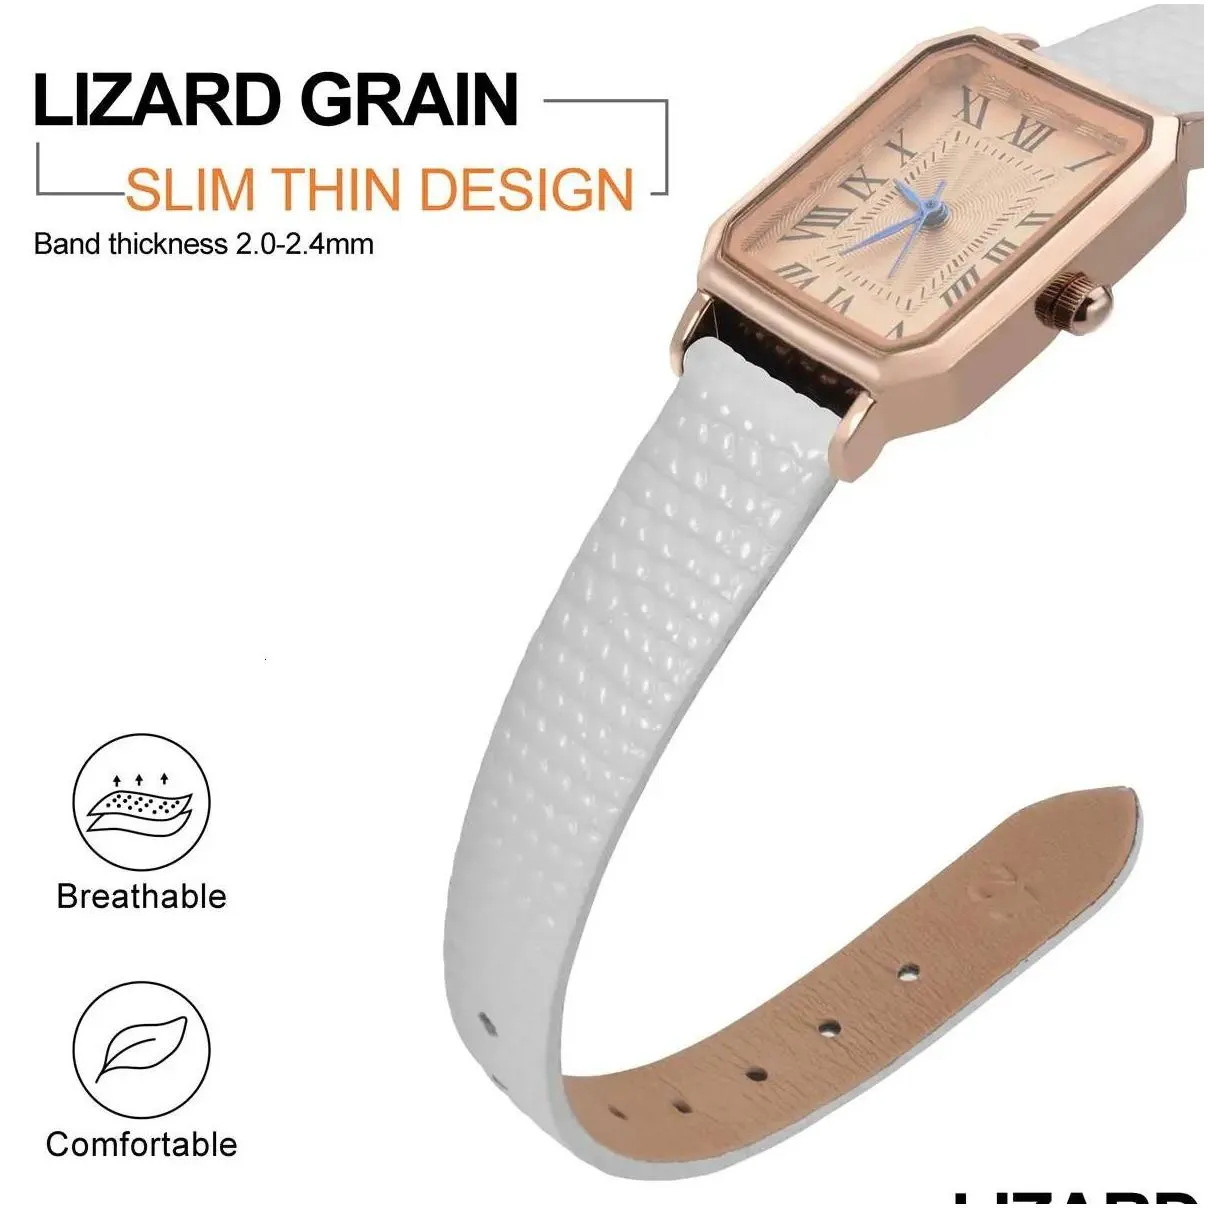 Watch Bands ANNEFIT Leather Watch Band for Women 12mm 14mm 16mm 18mm 20mm Lizard Grain Slim Thin Replacement Strap Stainless Steel Buckle